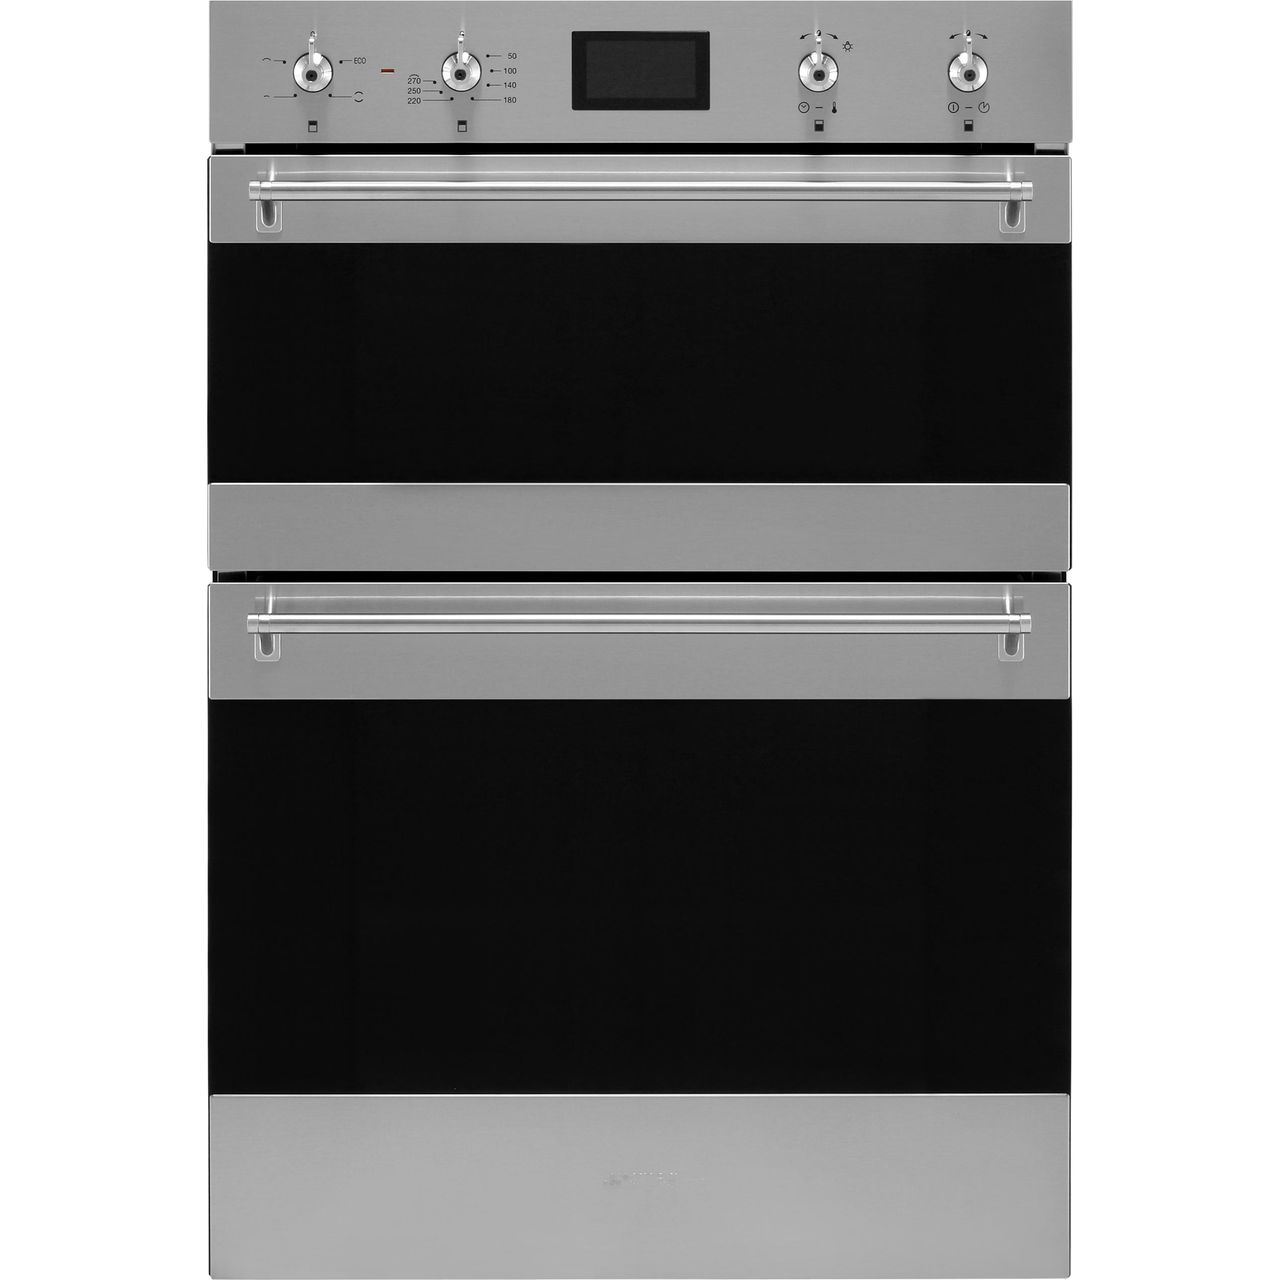 Smeg Classic DOSF6390X Built In Double Oven Review